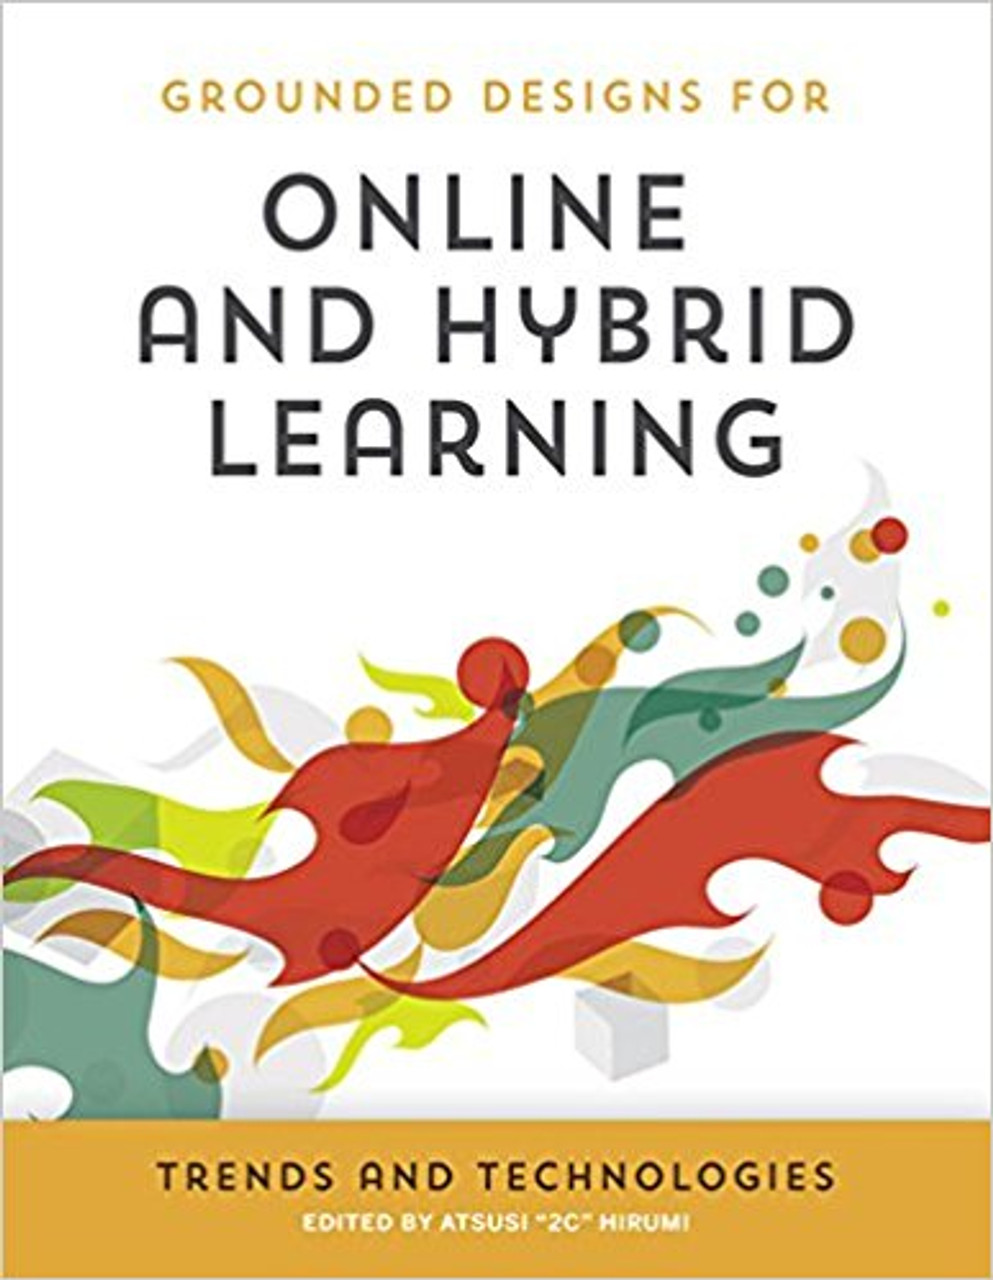 Online and Hybrid Learning Trends & Technologies by Atsusi Hirumi